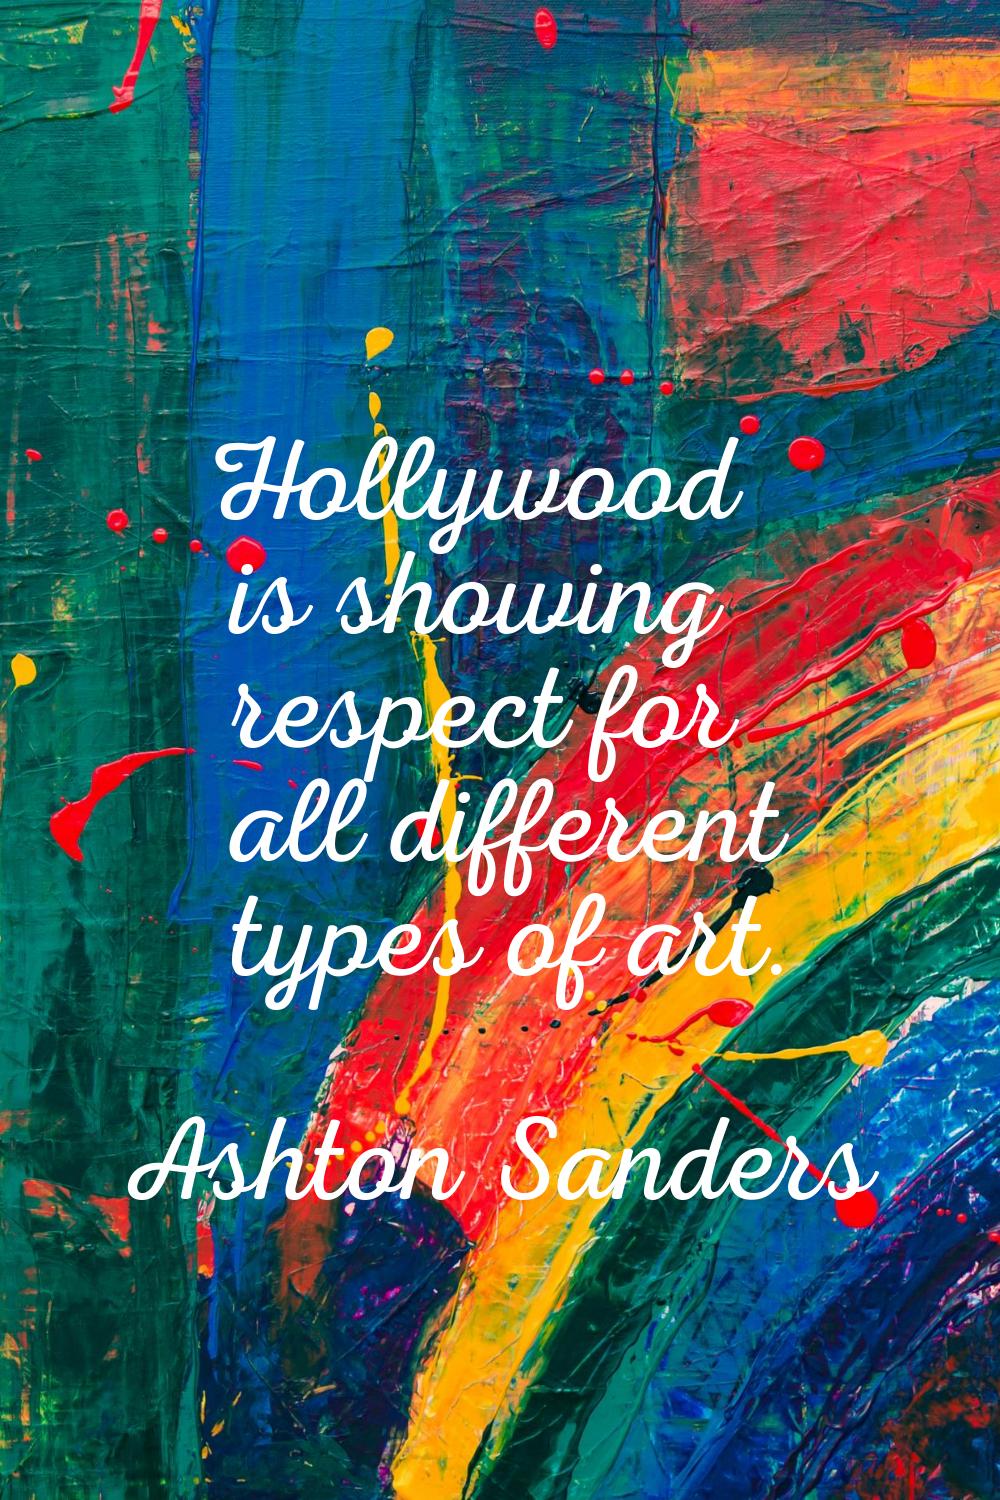 Hollywood is showing respect for all different types of art.